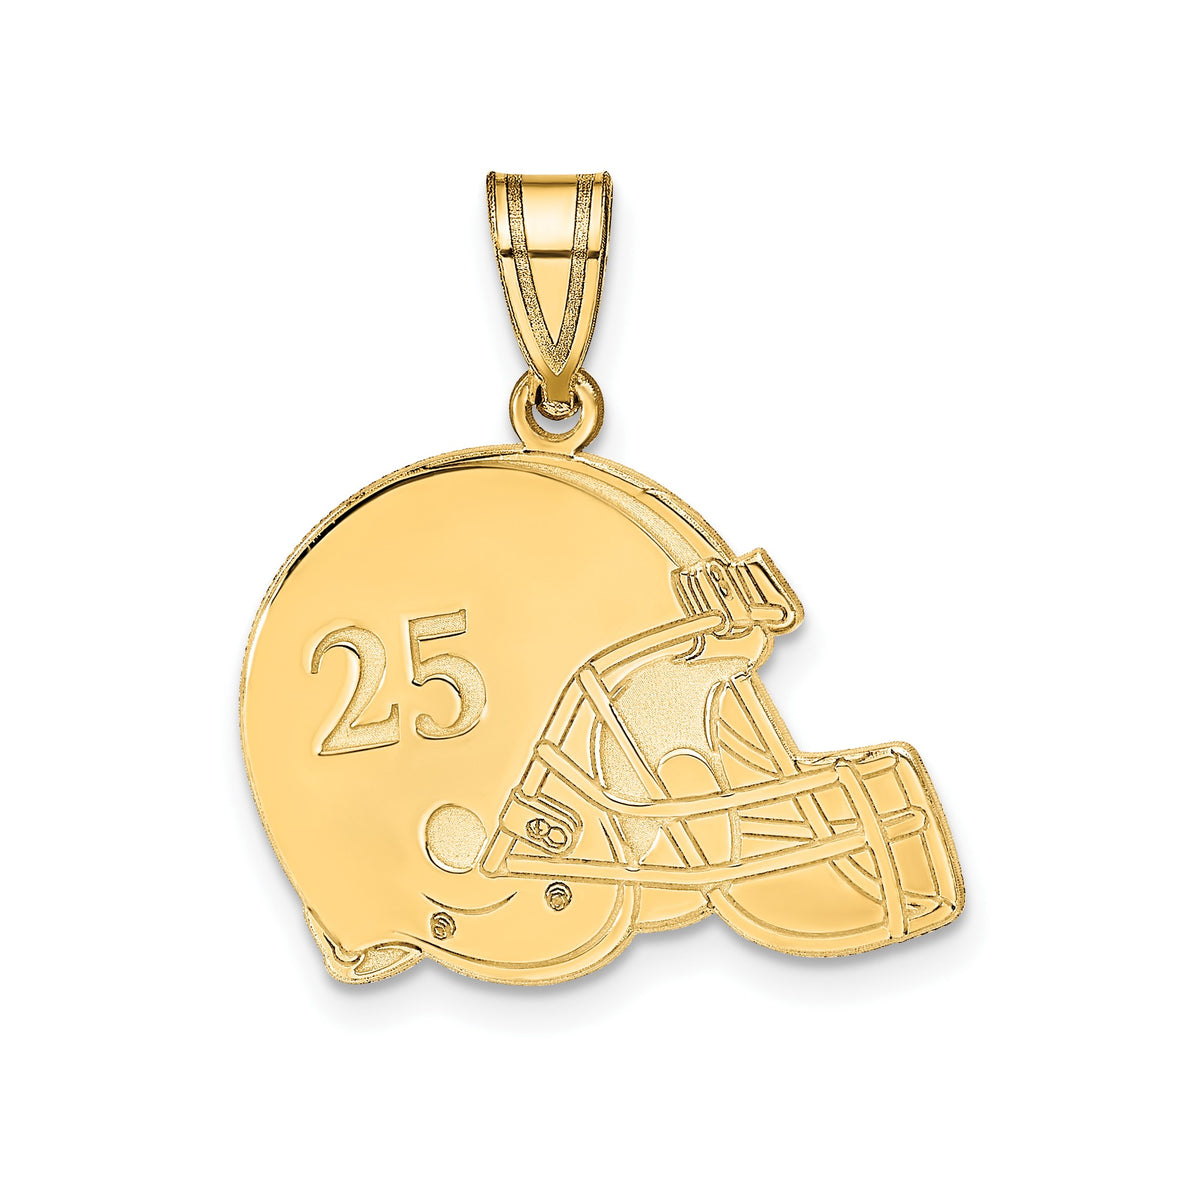 Personalized Football Helmet Pendant w/ Name & Number Necklace in Sterling Silver , Gold Plated or 10k Gold Laser Engraved Football Pendant